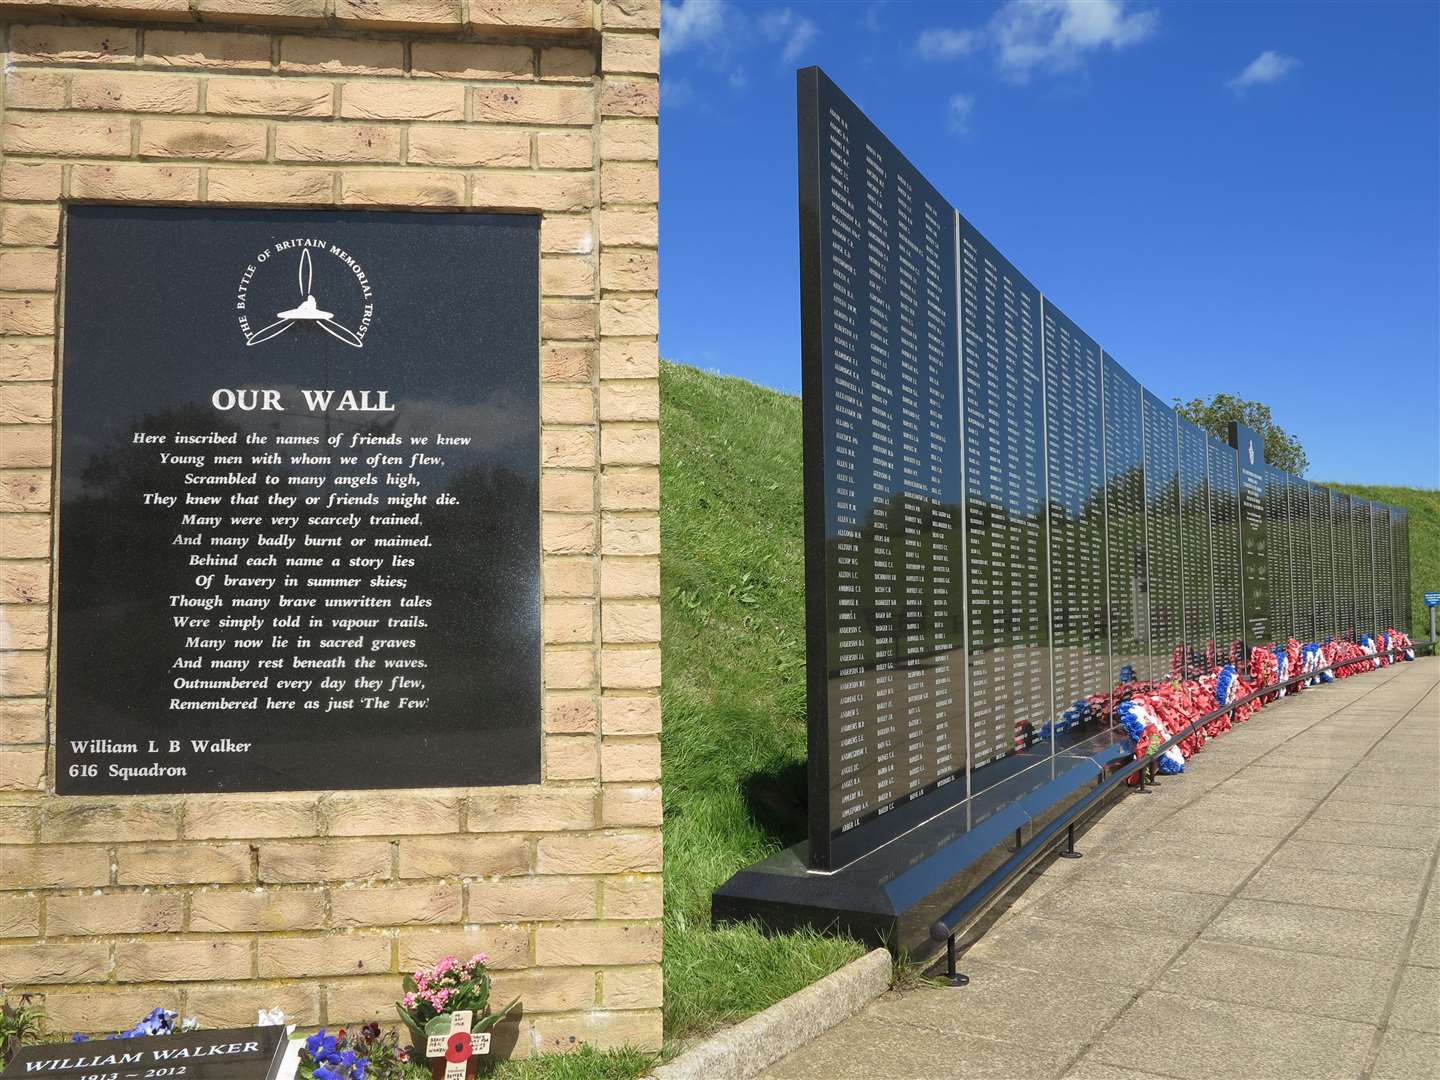 The pilot's name will be added to the Christopher Foxley-Norris Memorial Wall at the Battle of Britain Memorial